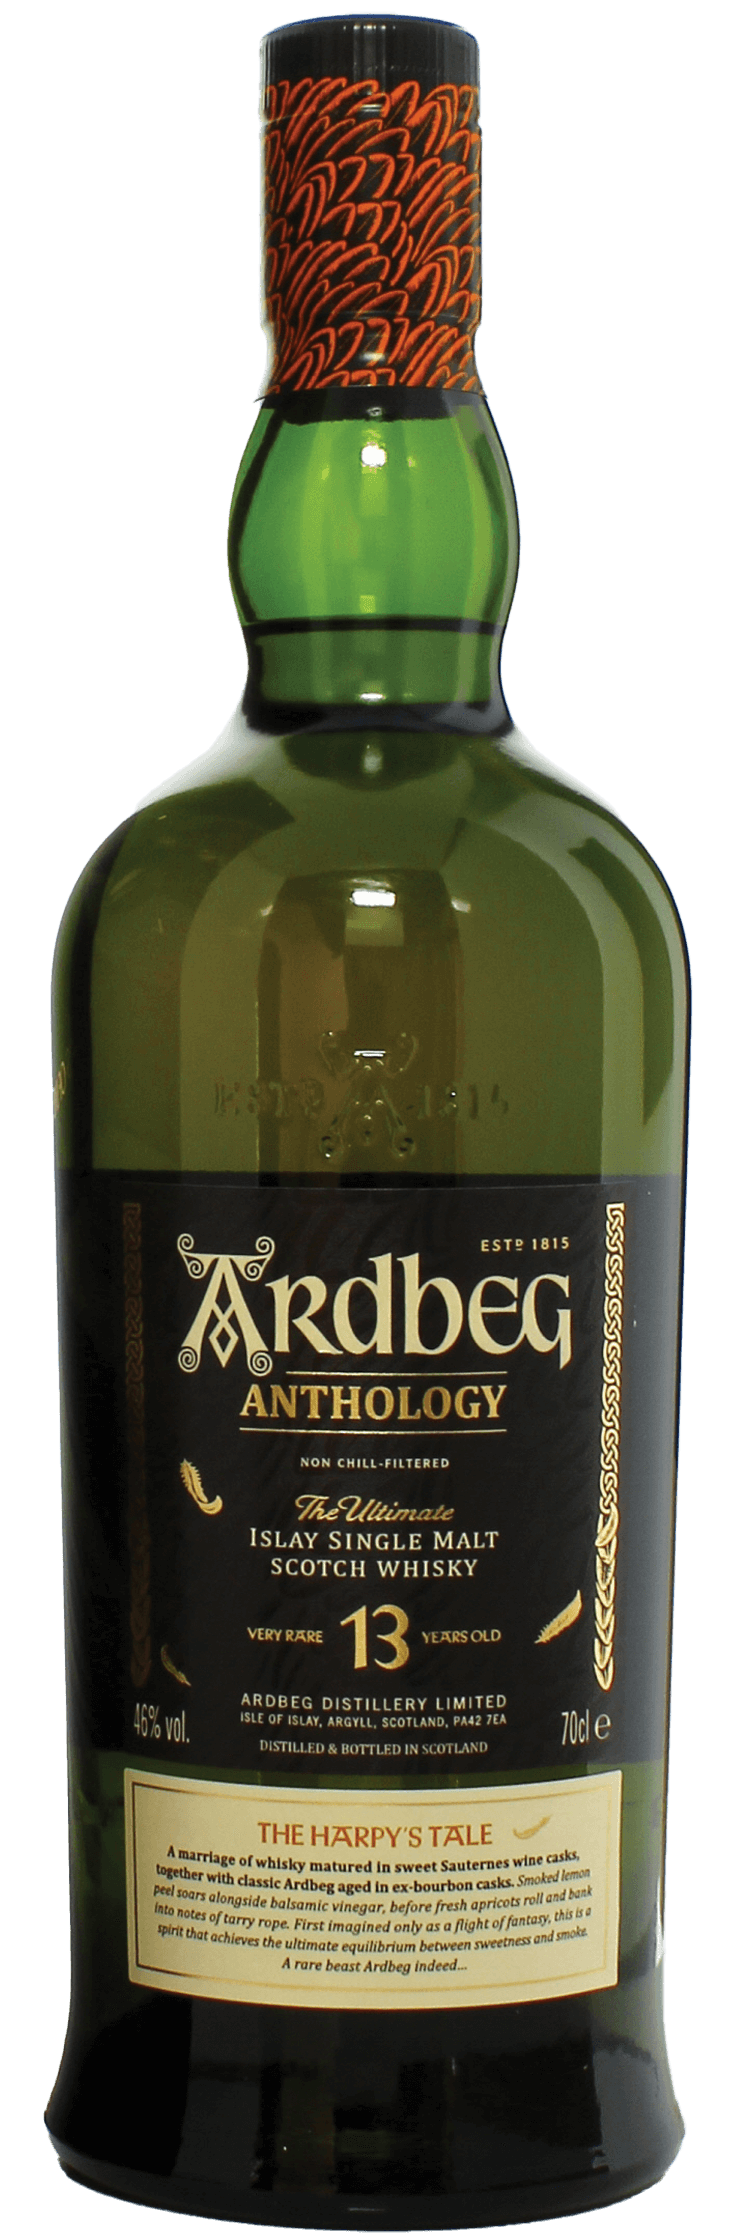 Ardbeg 13 Year Old Anthology - The Harpy's Tale Whisky 70cl